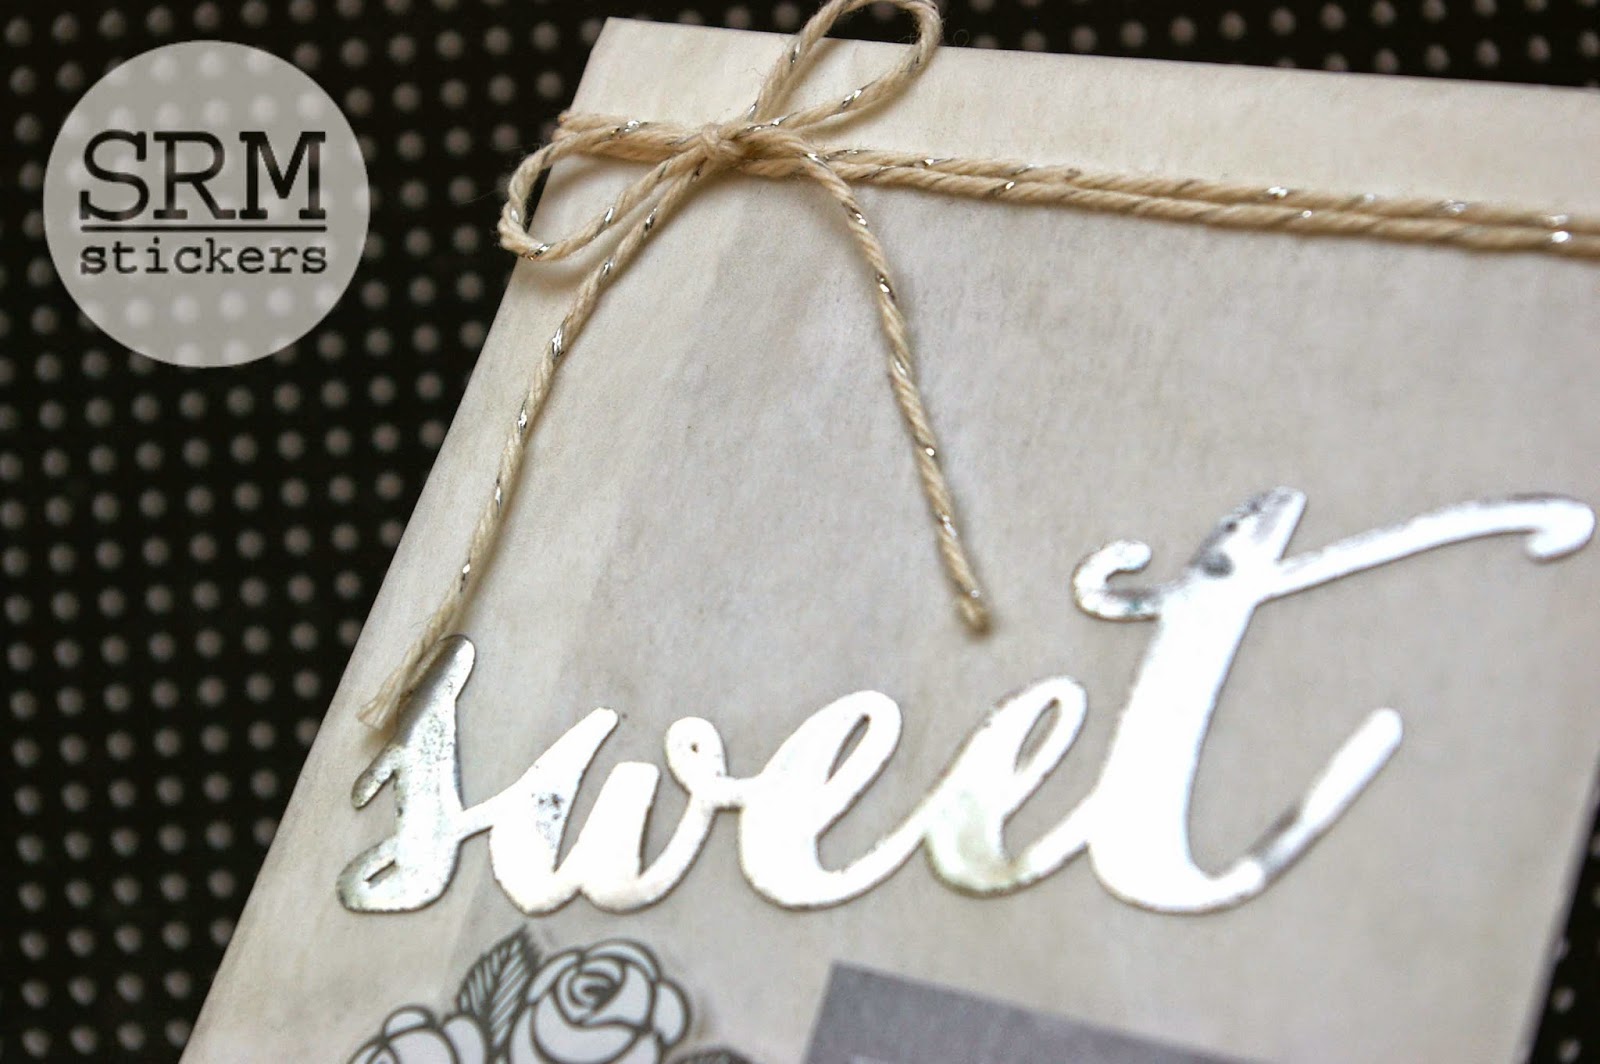 SRM Stickers Blog - Sweet Love Wedding Gift by Lorena - #glassinebag #shimmertwine #twine #stickers